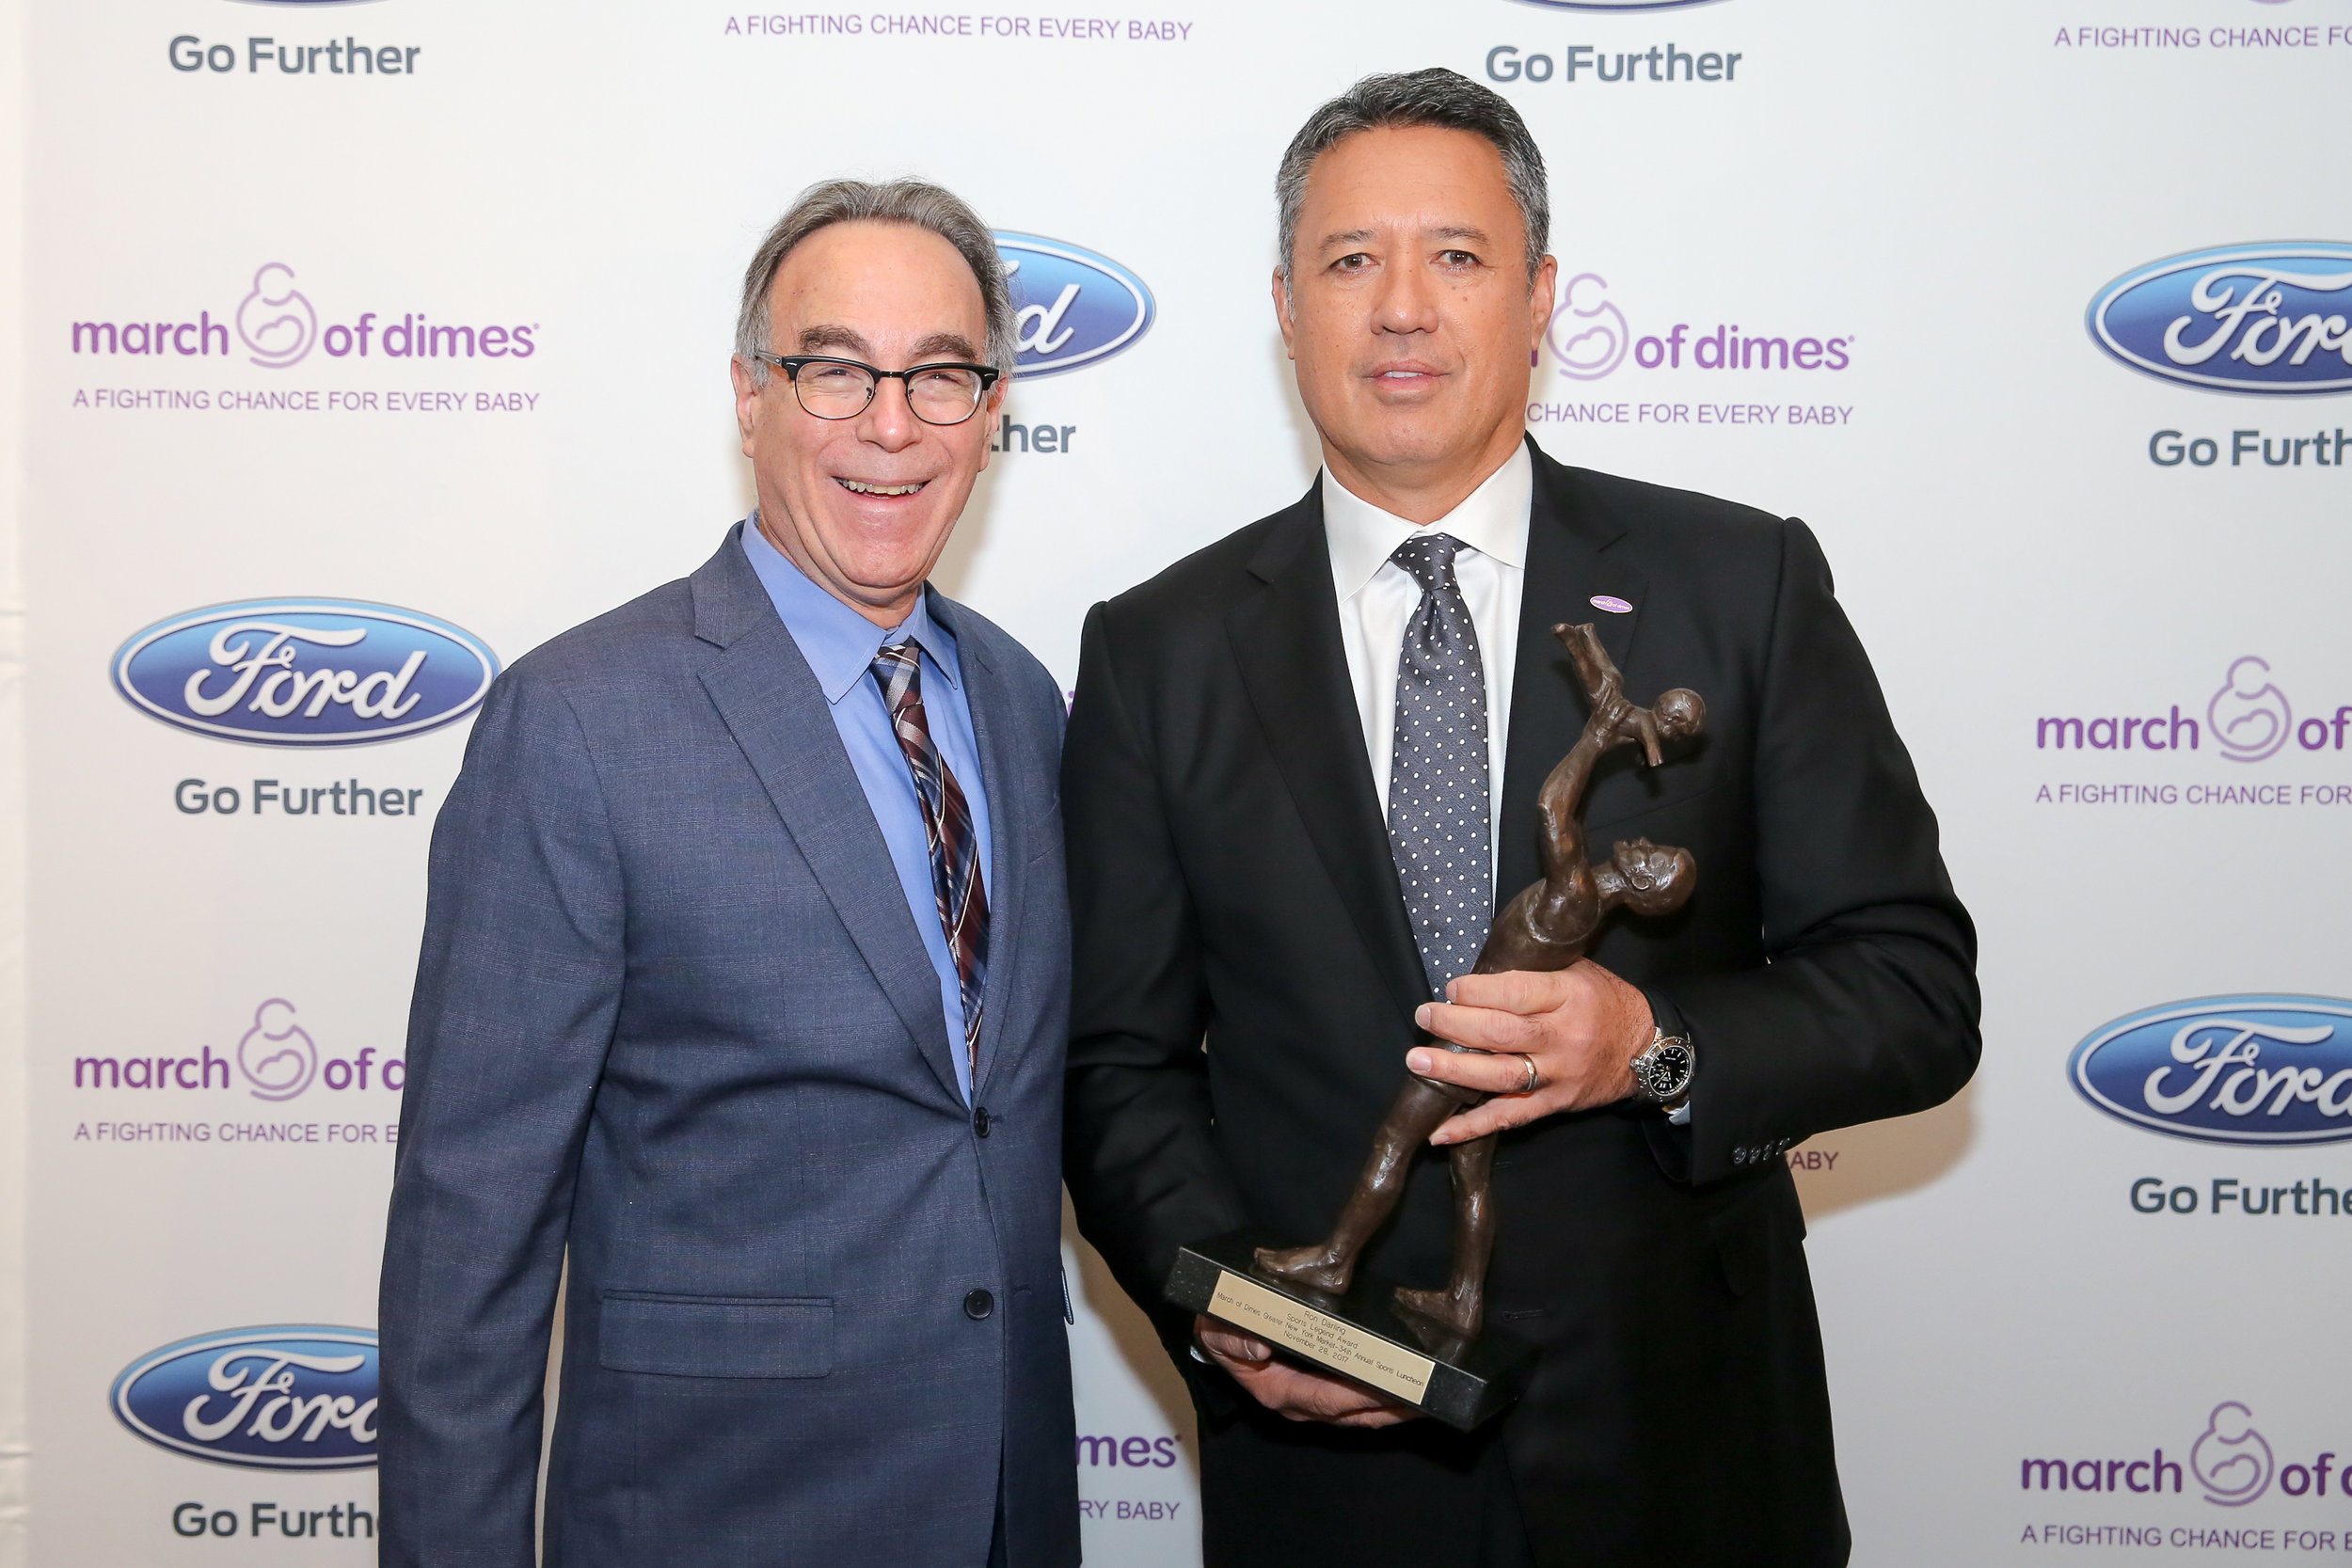  Mellon with honoree Ron Darling, sports broadcaster and former NY Mets star pitcher. Photos © Hechler Photography 